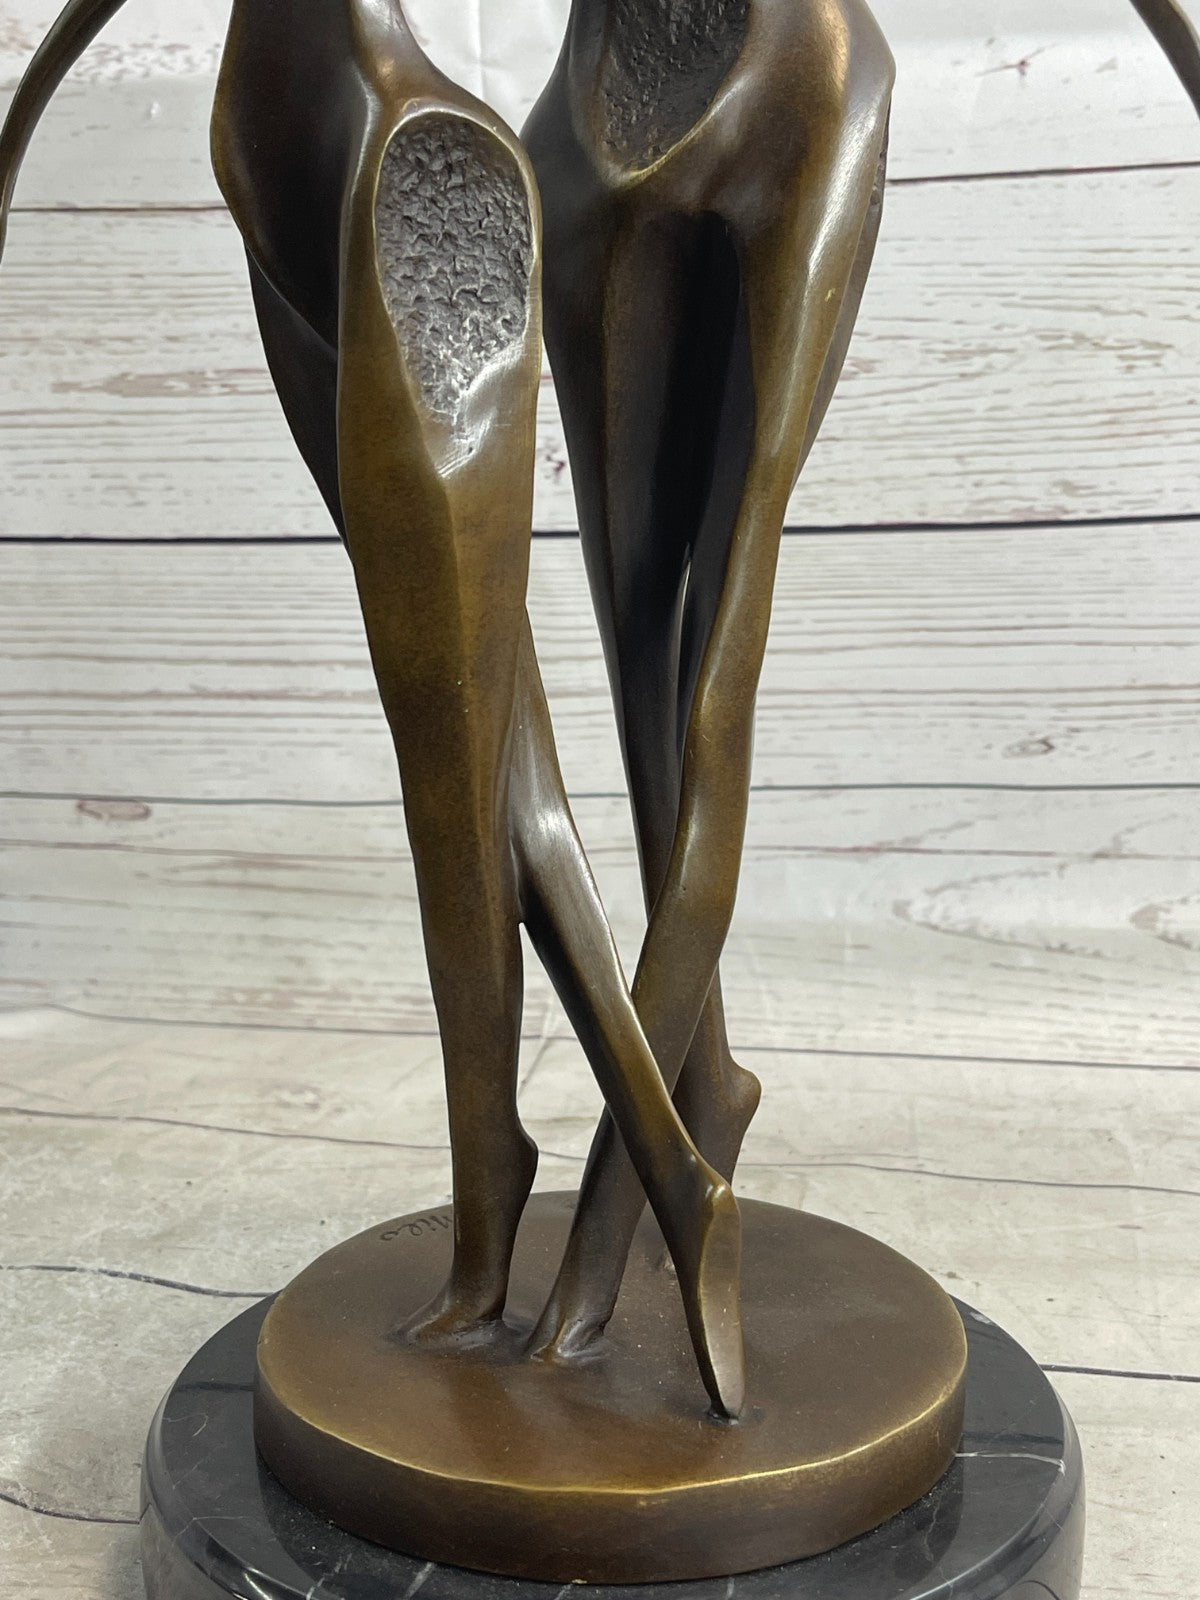 Elegant Home Office Decor: Signed Milo Bronze Sculpture, Abstract Shall We Dance Collectible